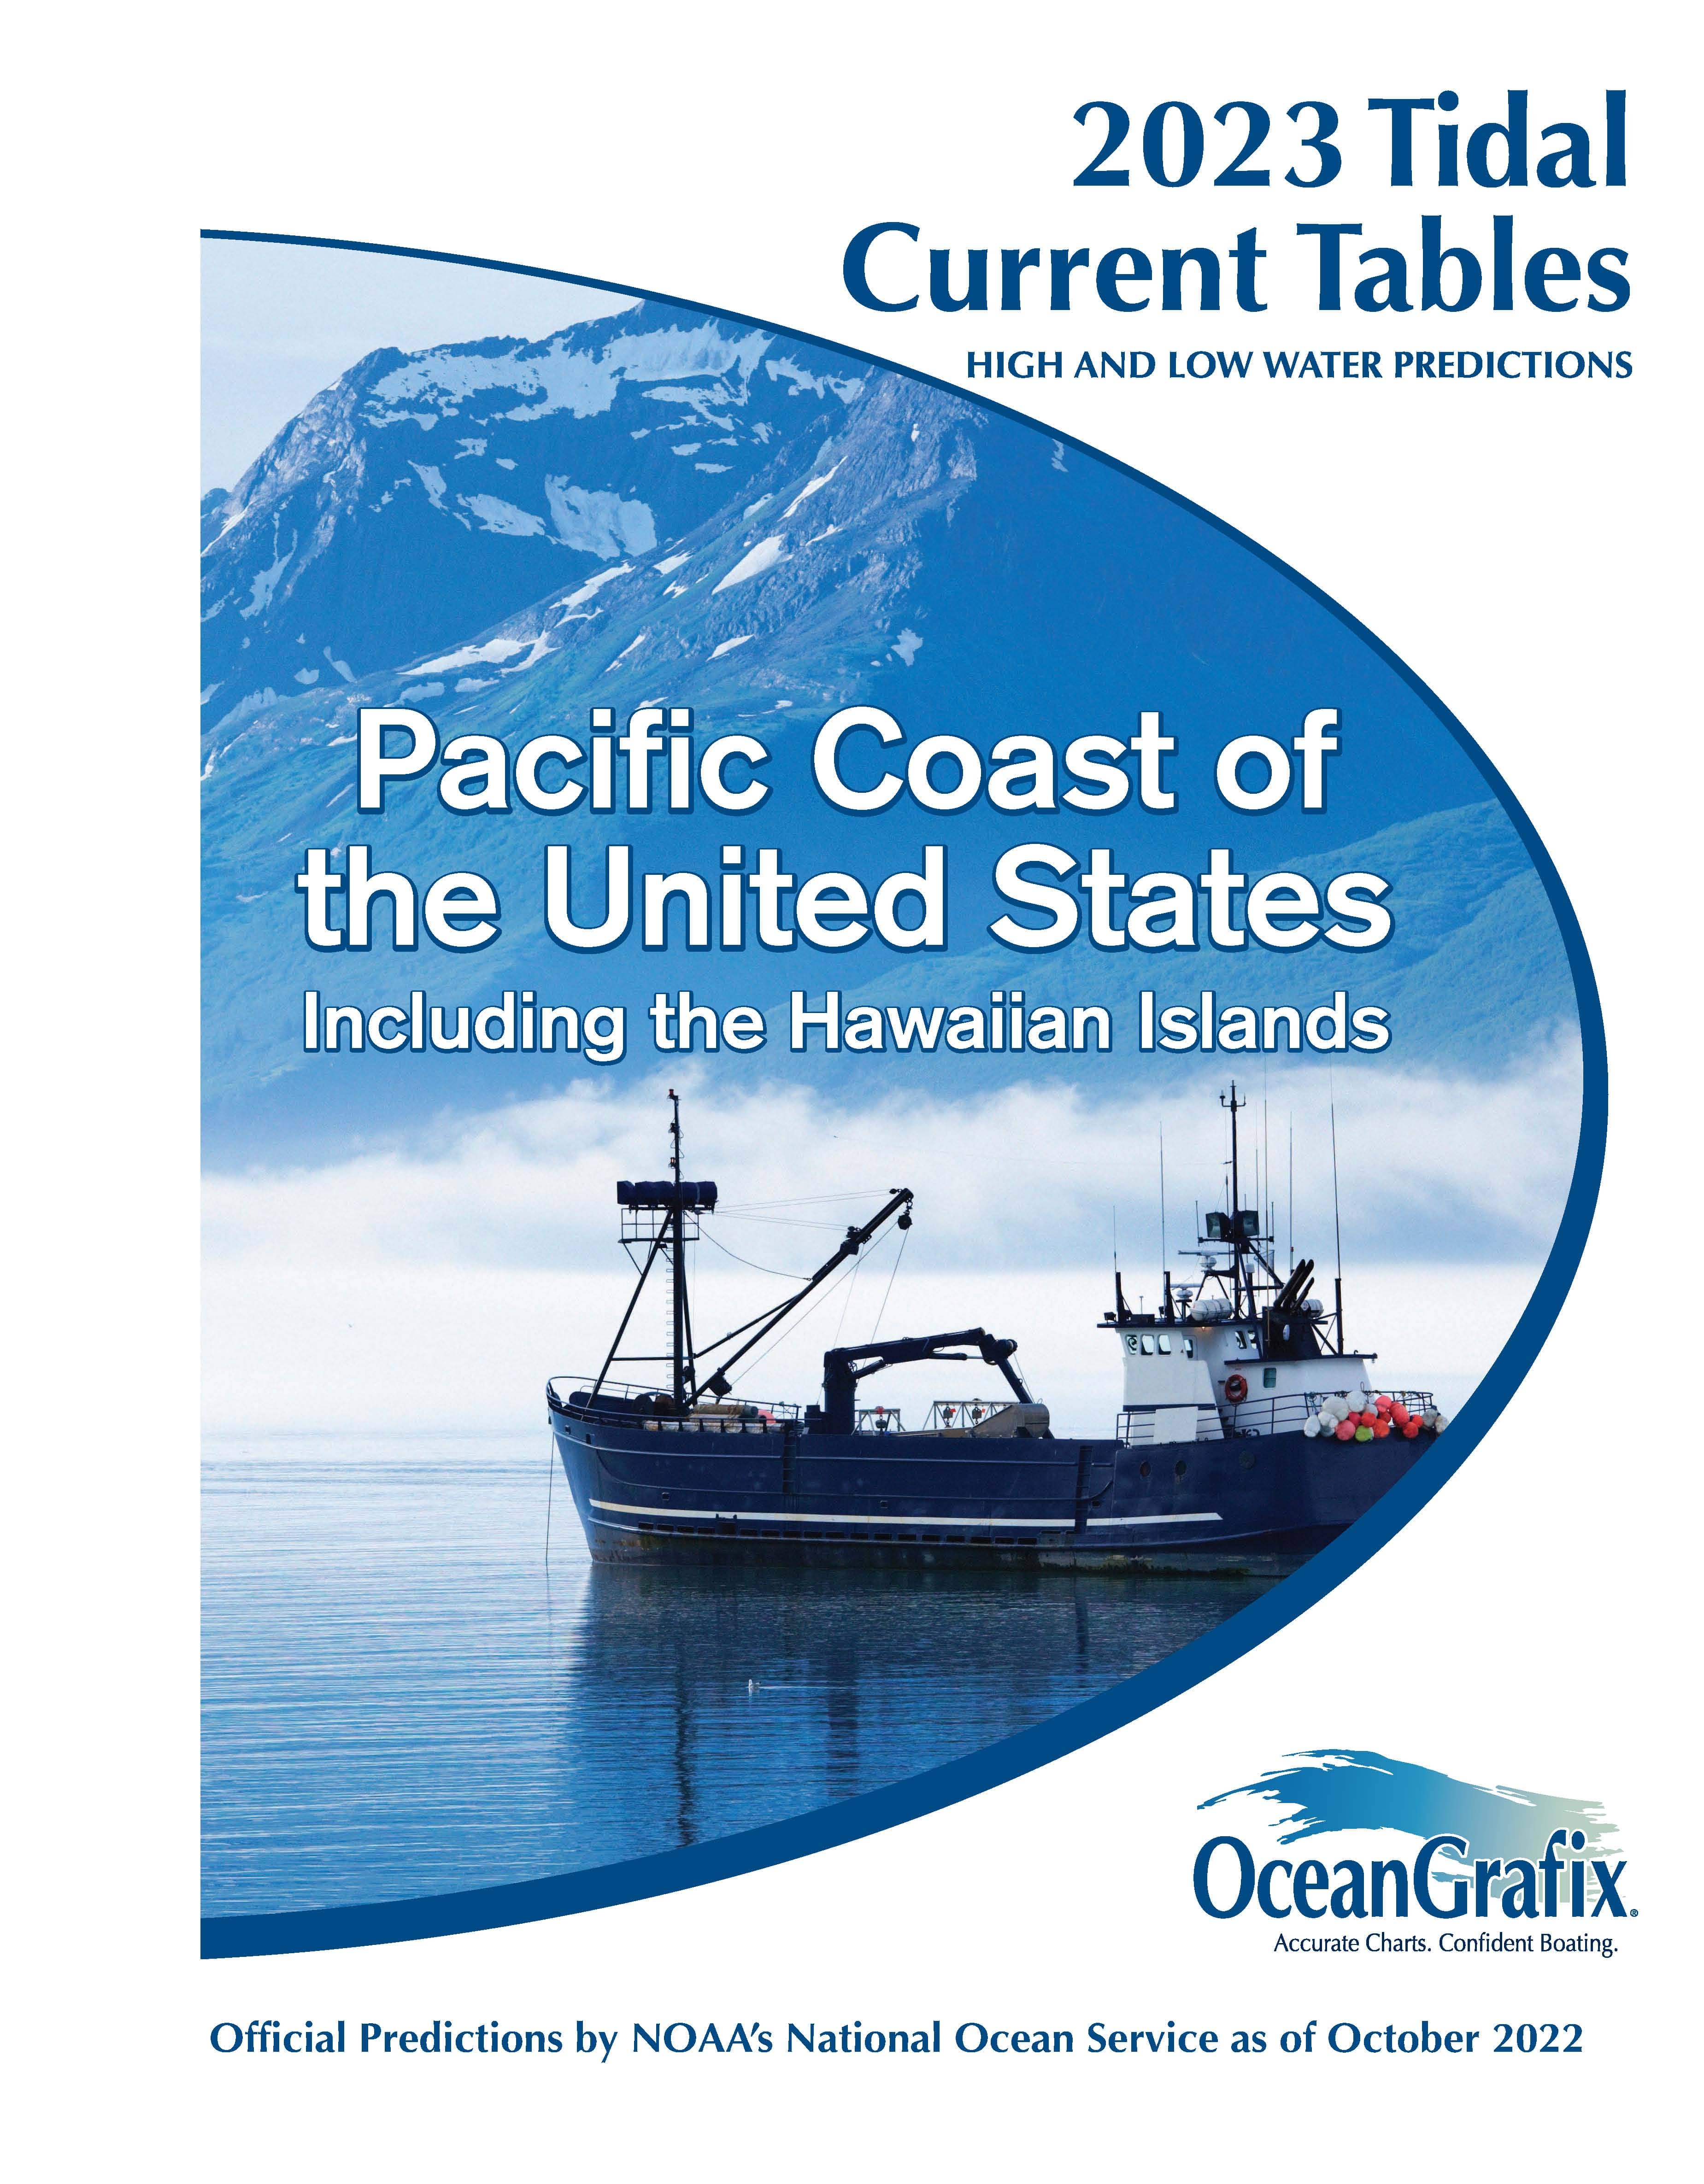 NOAA Tidal Current Tables: Pacific Coast of United States including the Hawaiian Islands, 2023 Edition